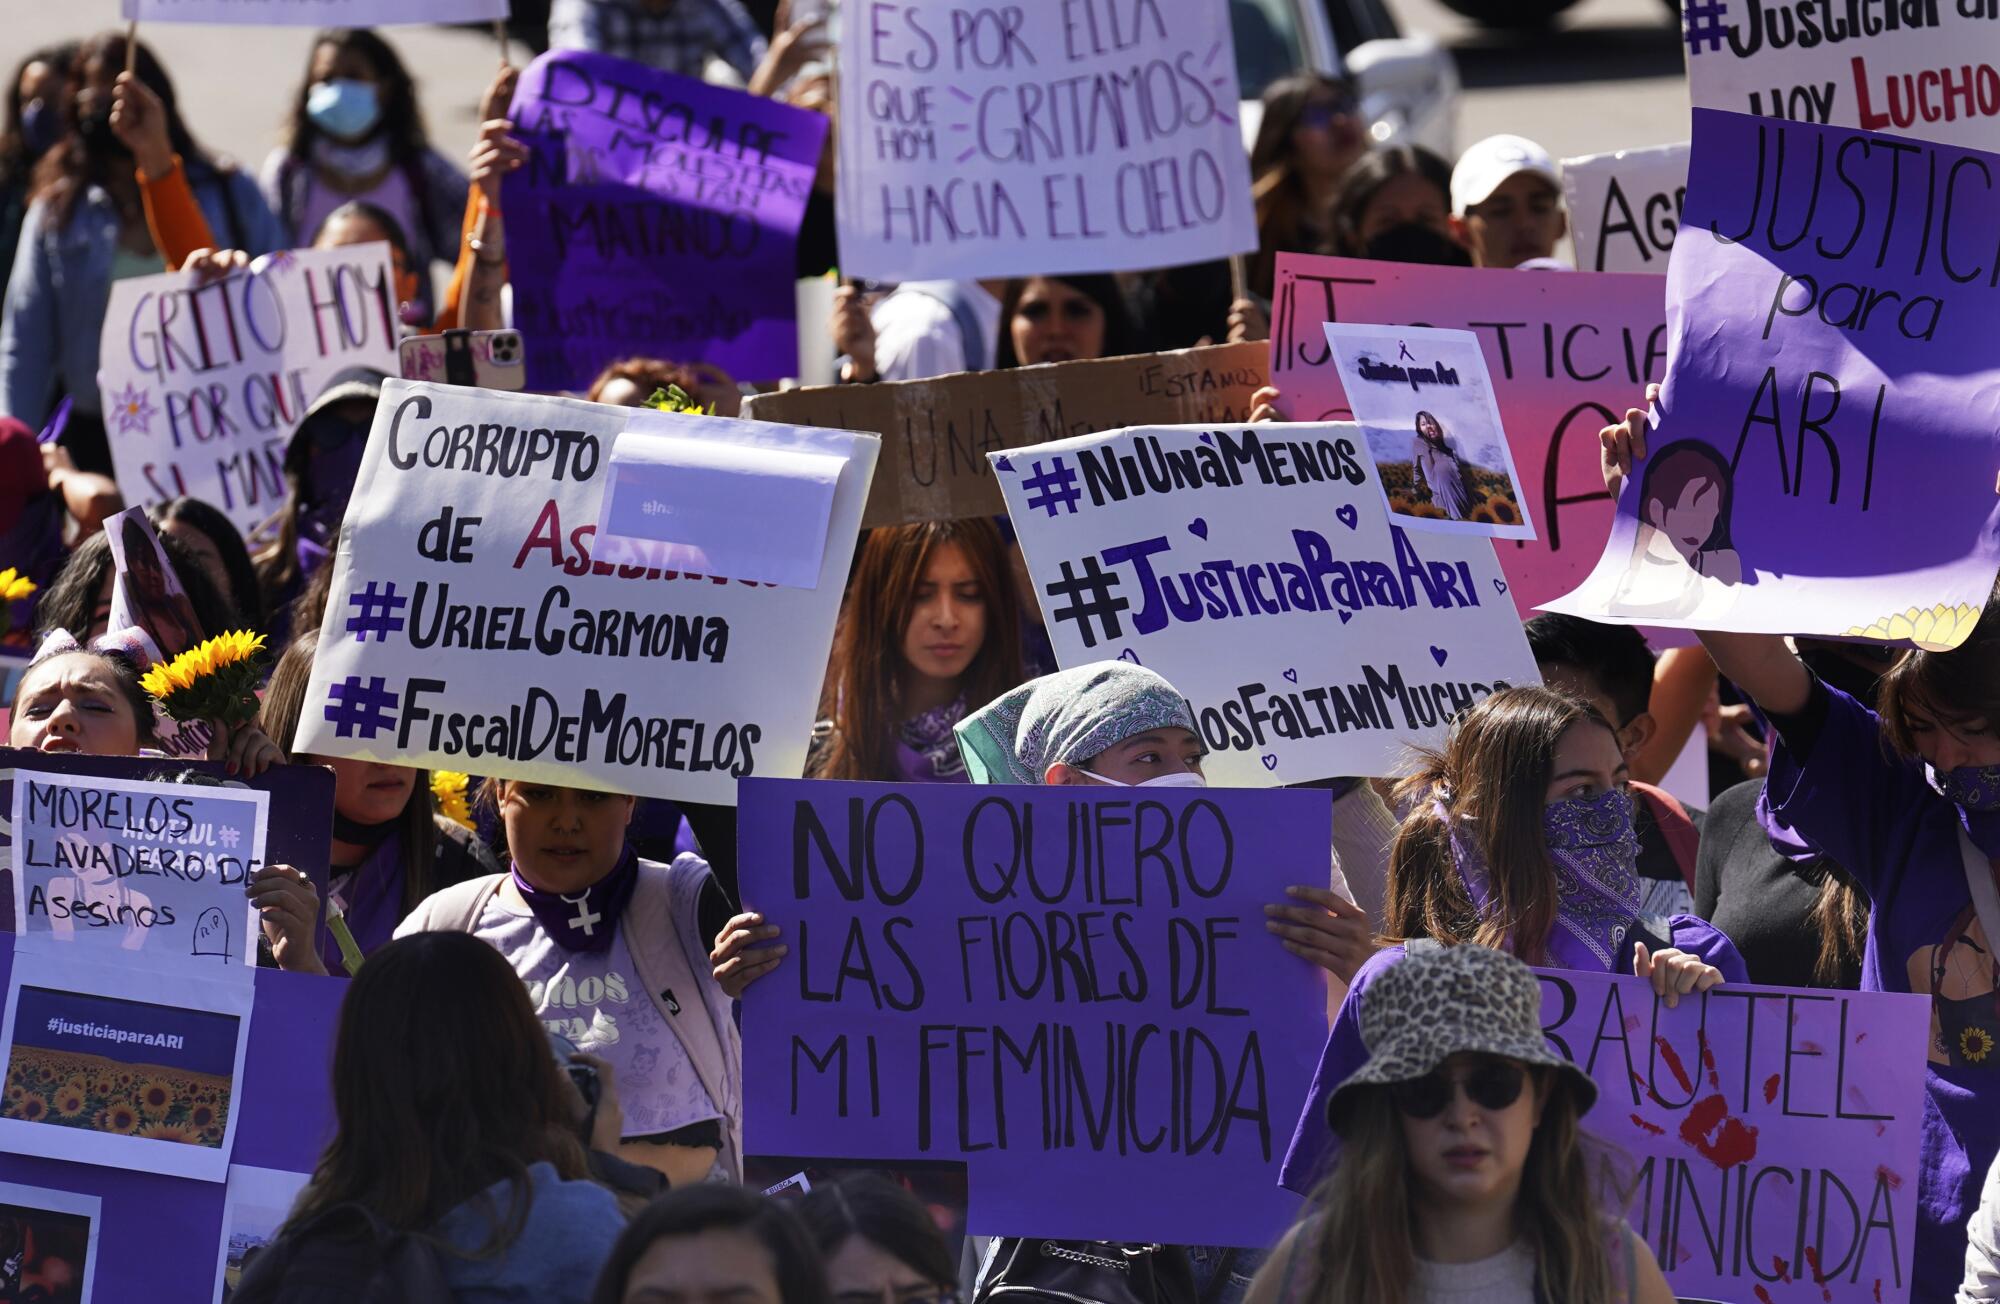 Members of feminist groups march in Mexico City to protest the slaying of Ariadna Lopez.